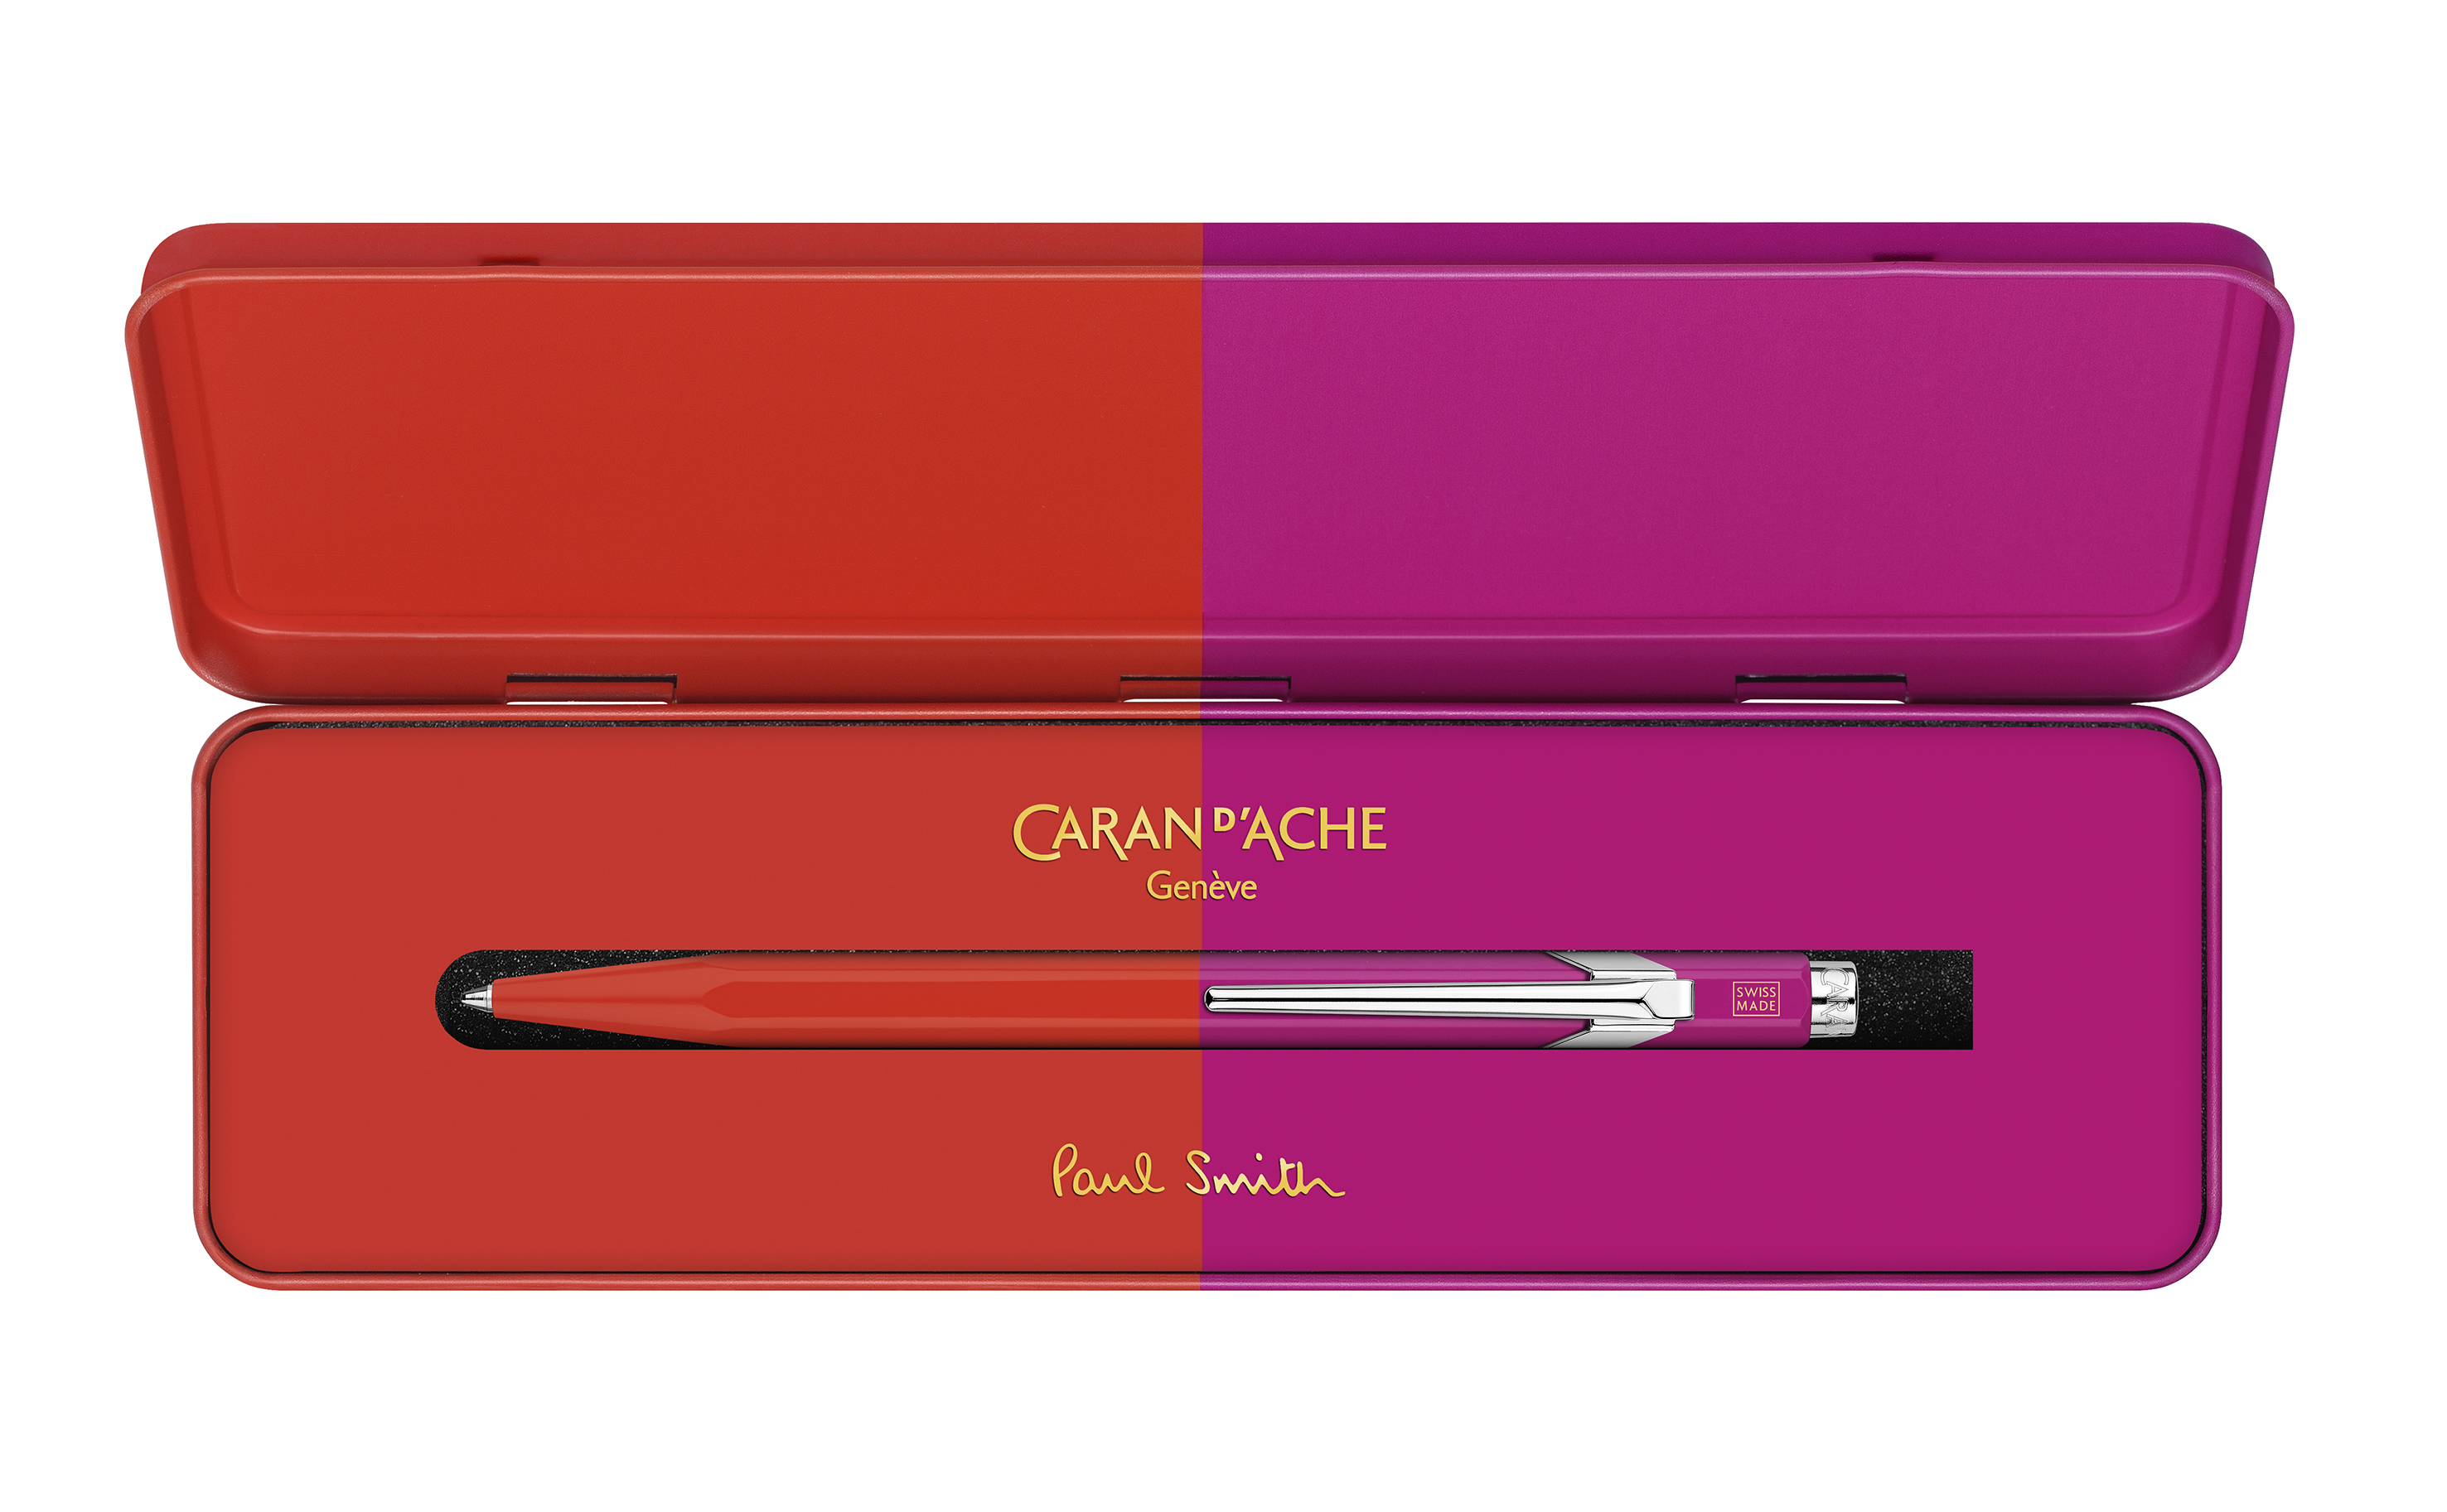 ballpoint pen 849 collaboration paul smith fourth edition colours wramred and melrosepink in its metal case